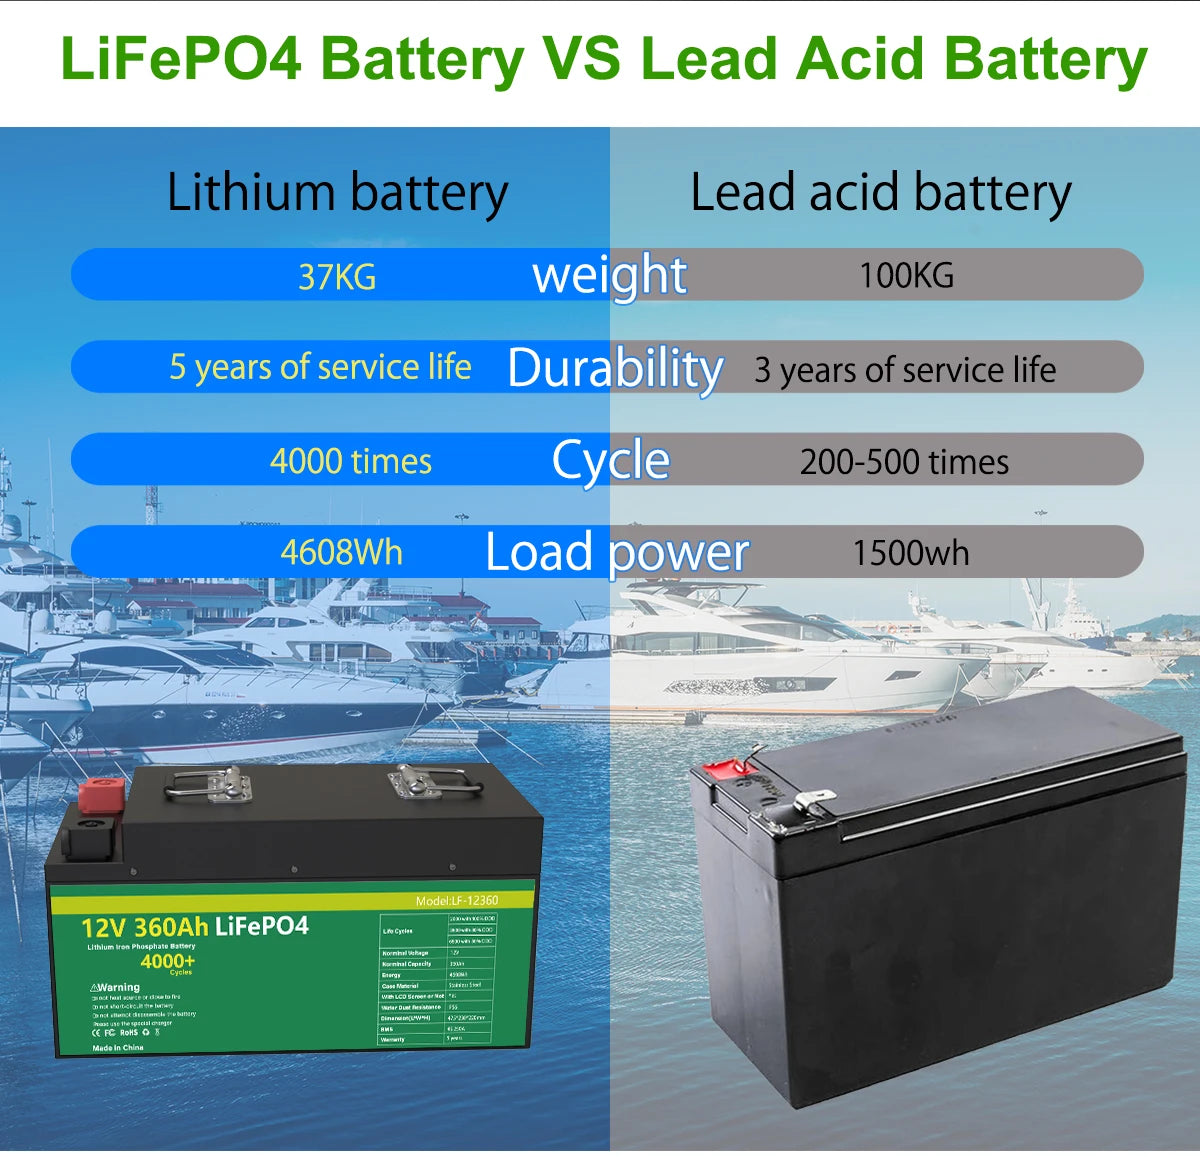 Compare our LiFePO4 battery to Lead Acid batteries: superior performance, durability, and warranty.